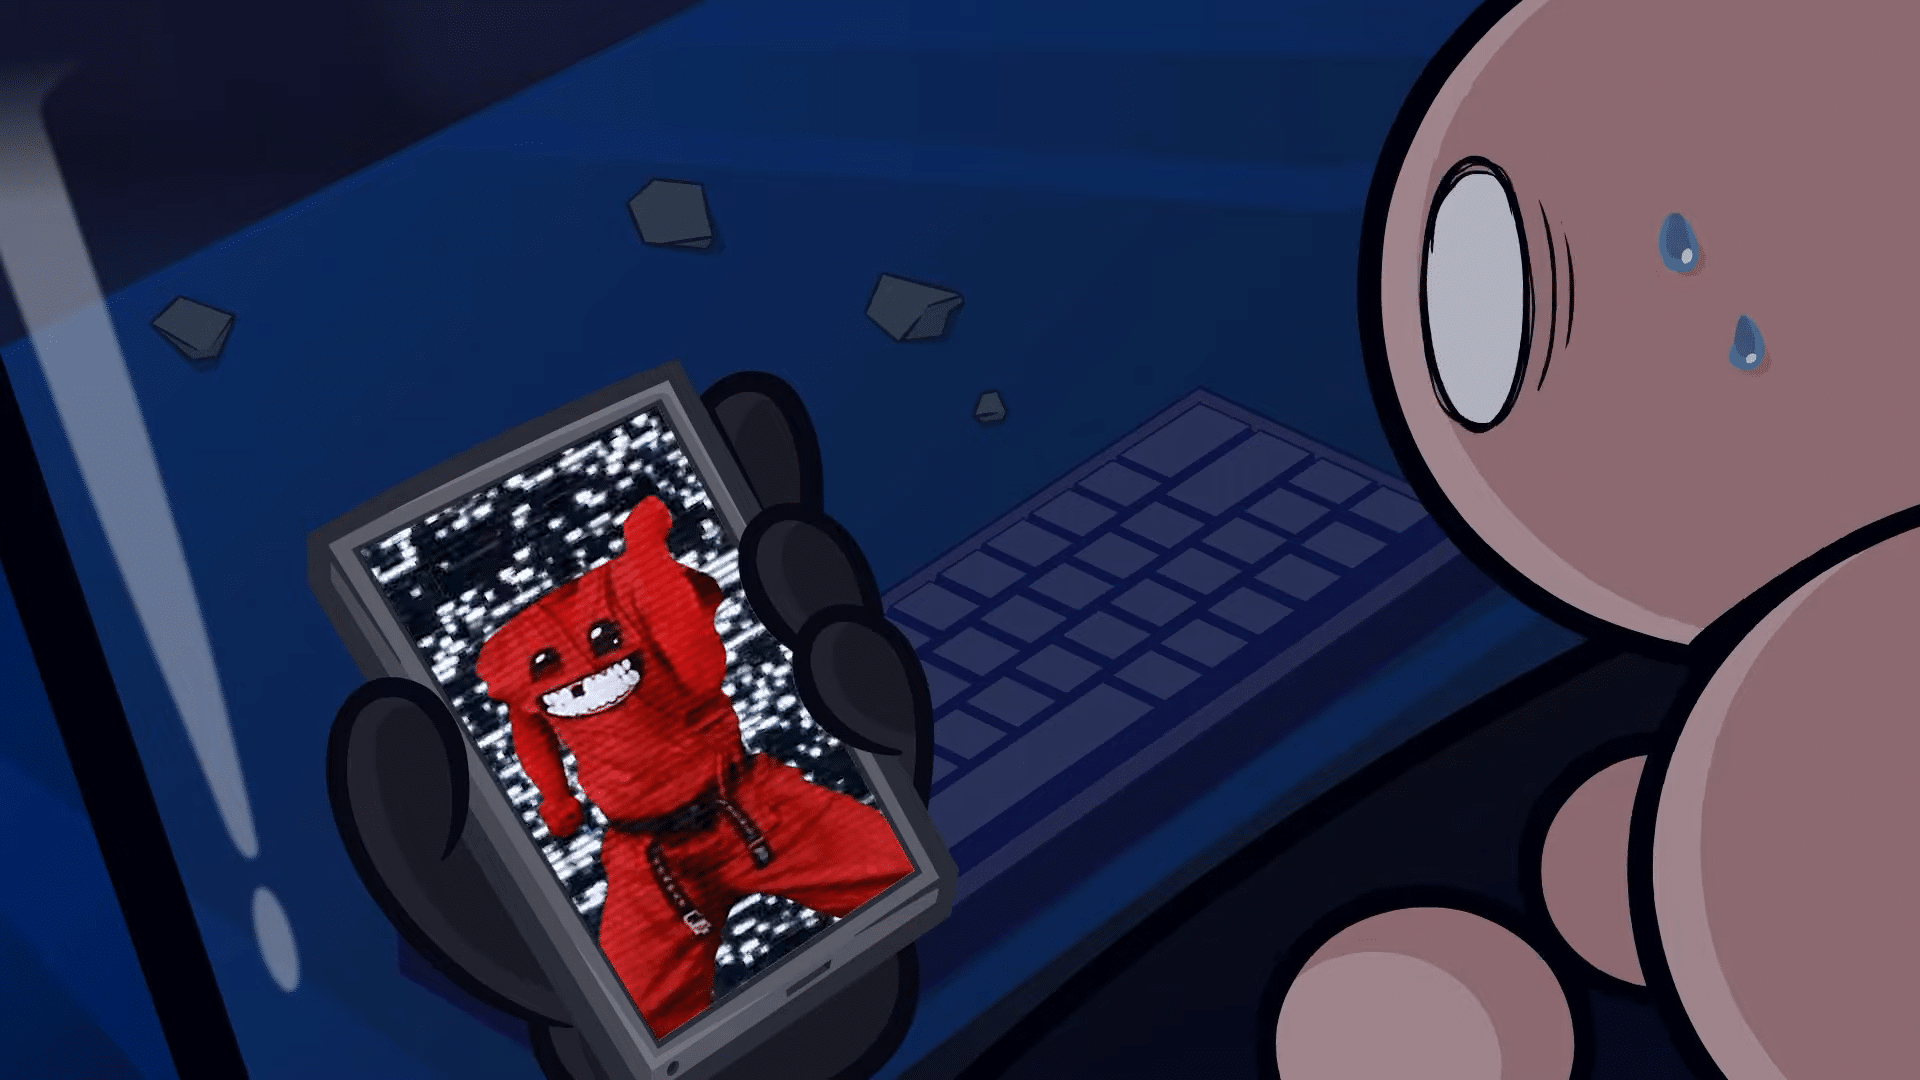 Rage With Nostalgia In the Super Meat Boy Forever Mobile Release - Droid  Gamers